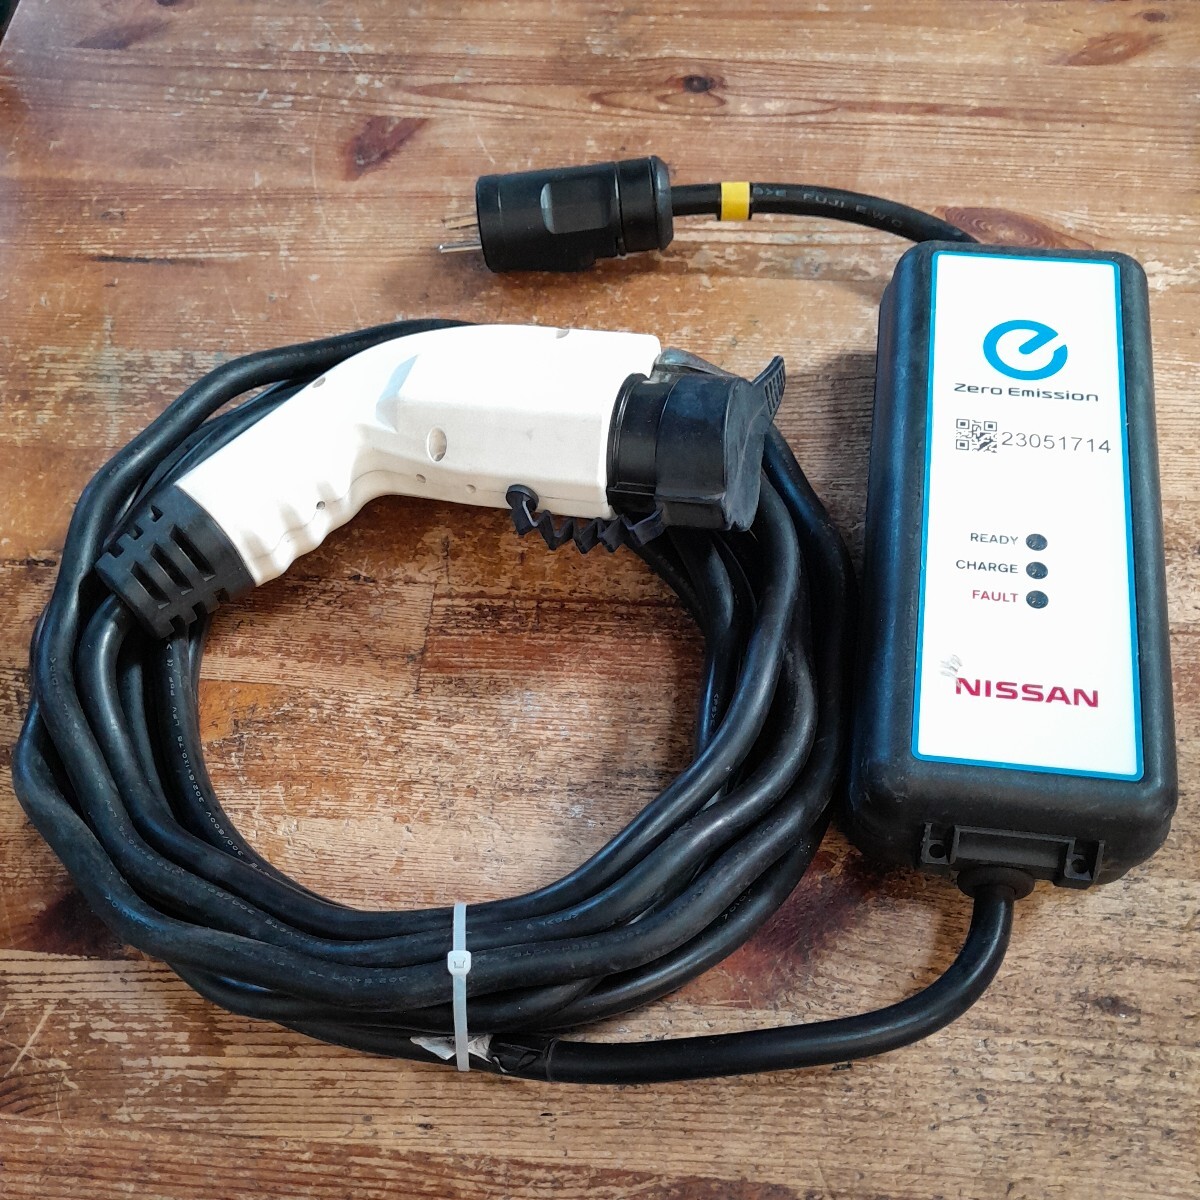 ( control number 23051714) Nissan leaf charge charge cable 29690 3NA1A ZEO approximately 7.5m 200V used 2012 year made selling out 